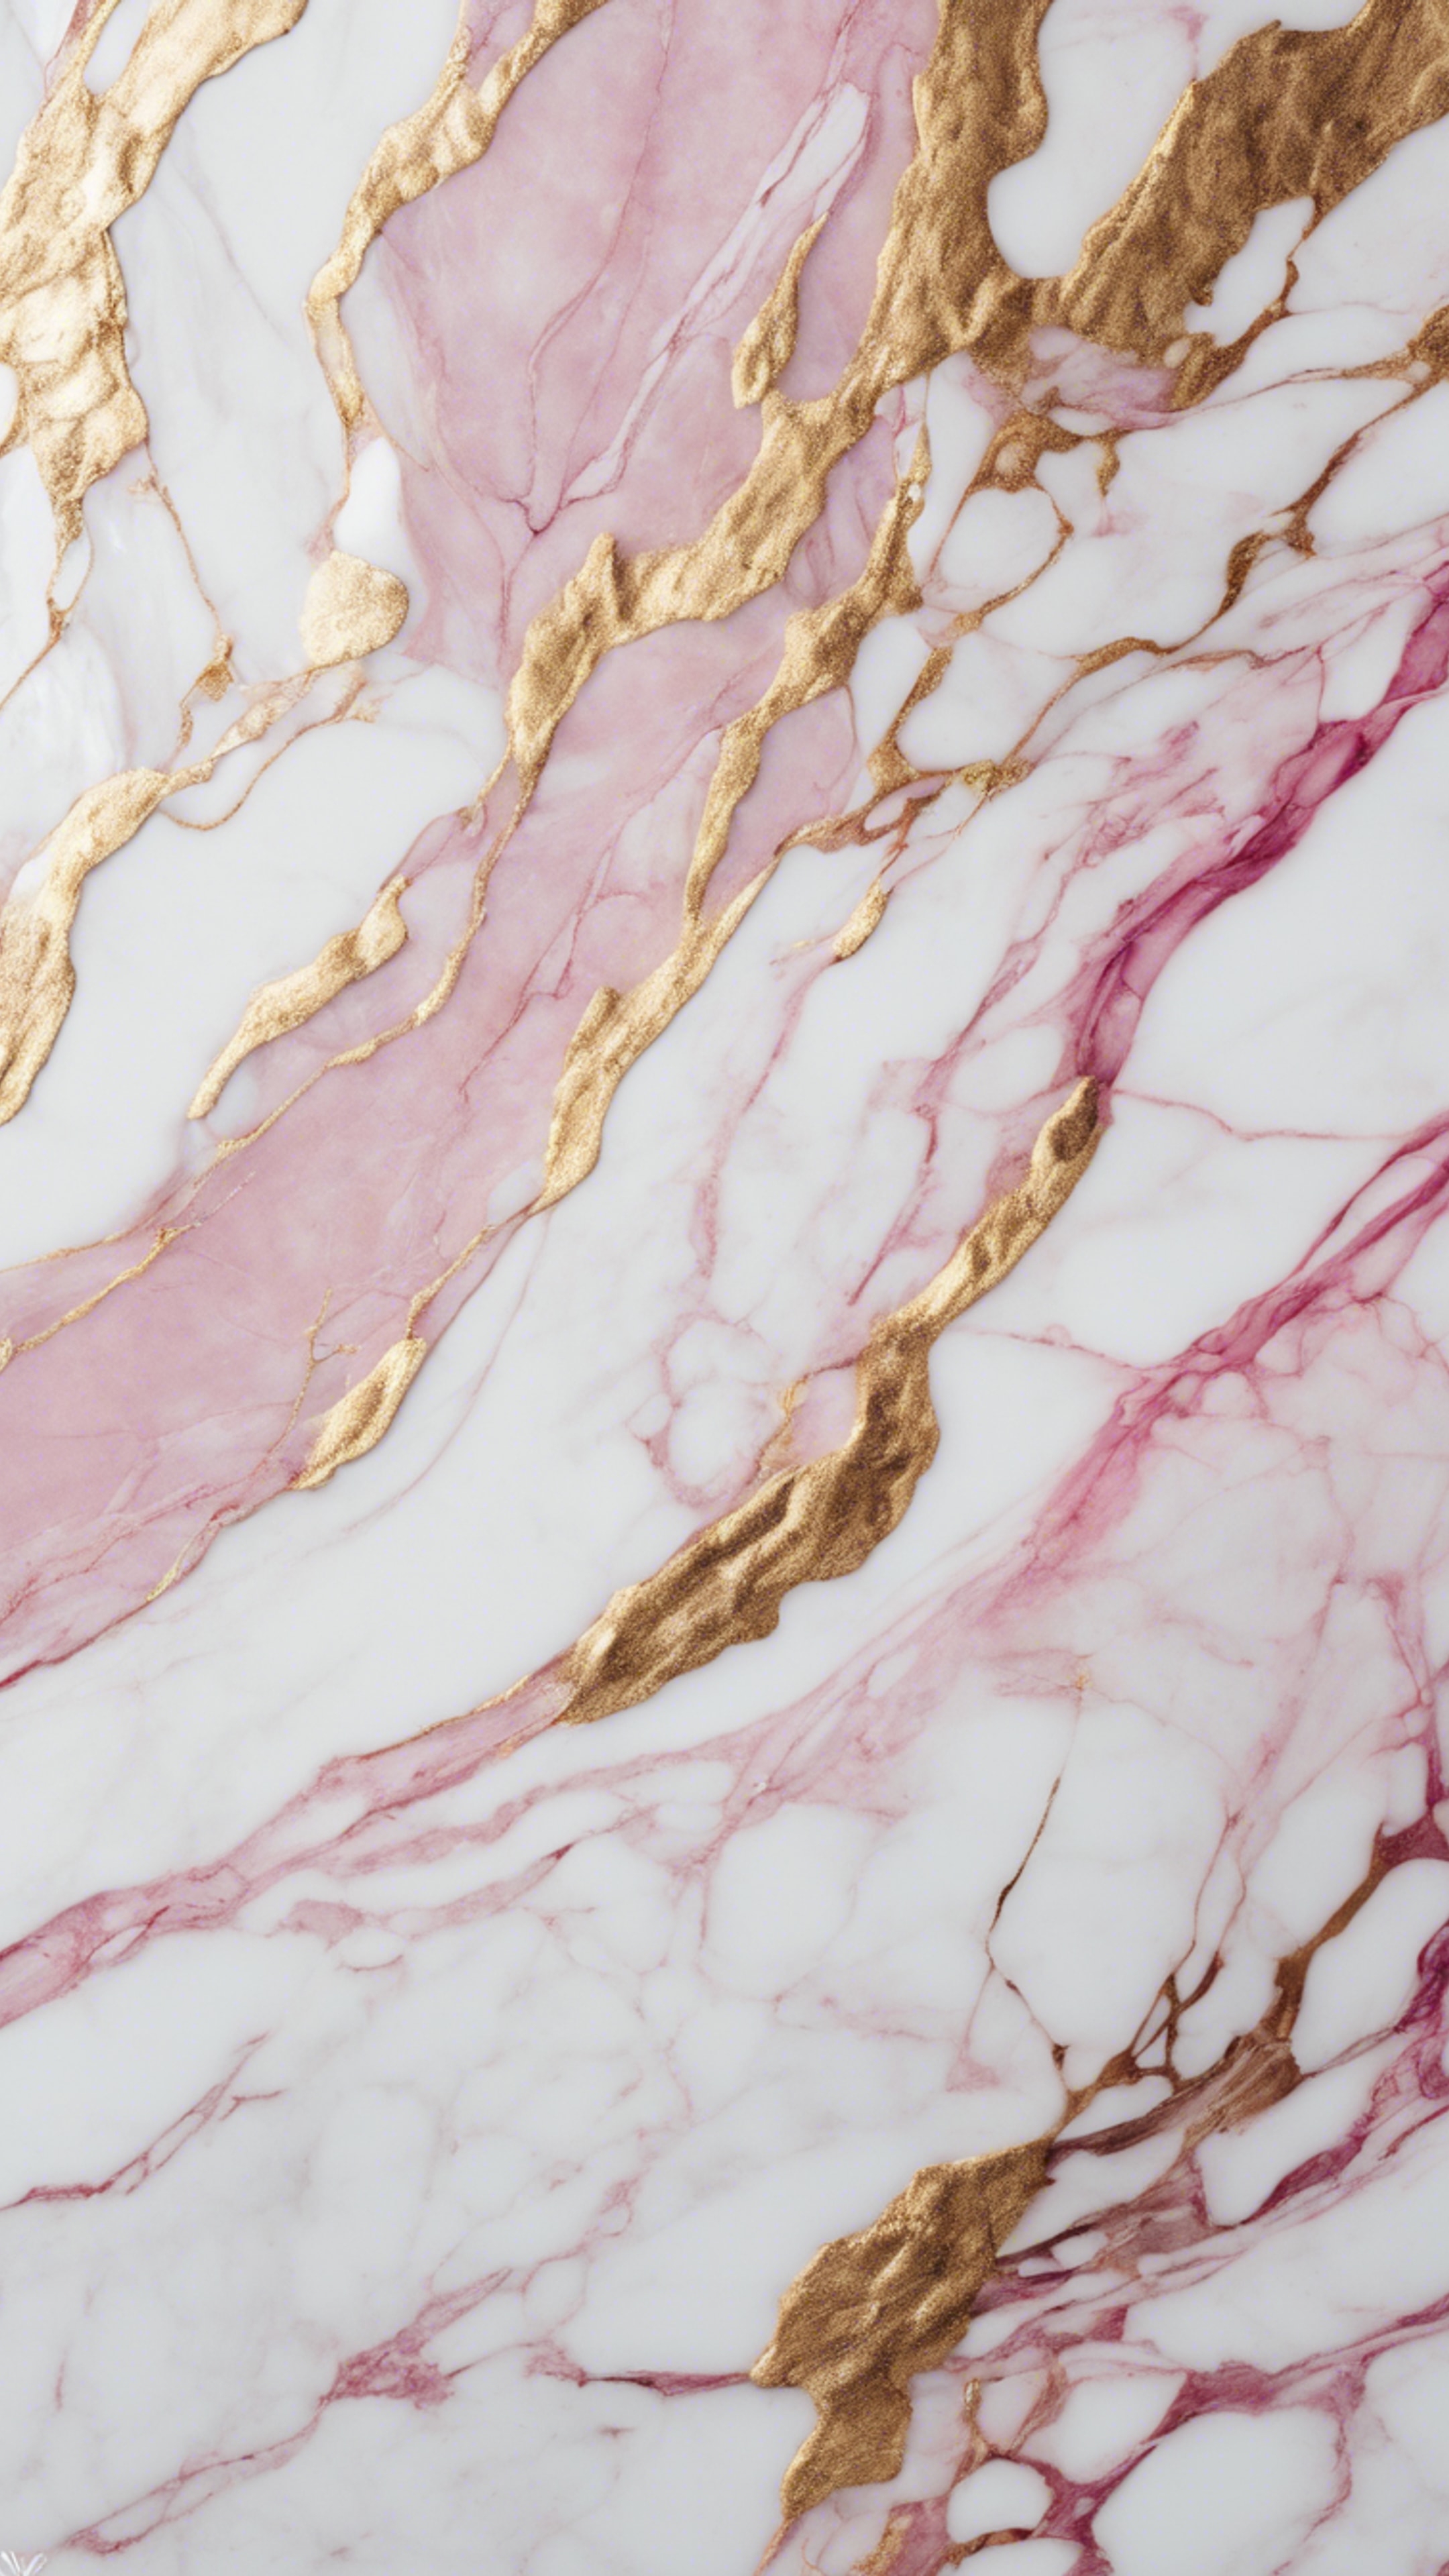 A close-up view of a white marble texture with subtle pink and gold streaks Tapeta[94d0ed0dfacd4436a1ca]